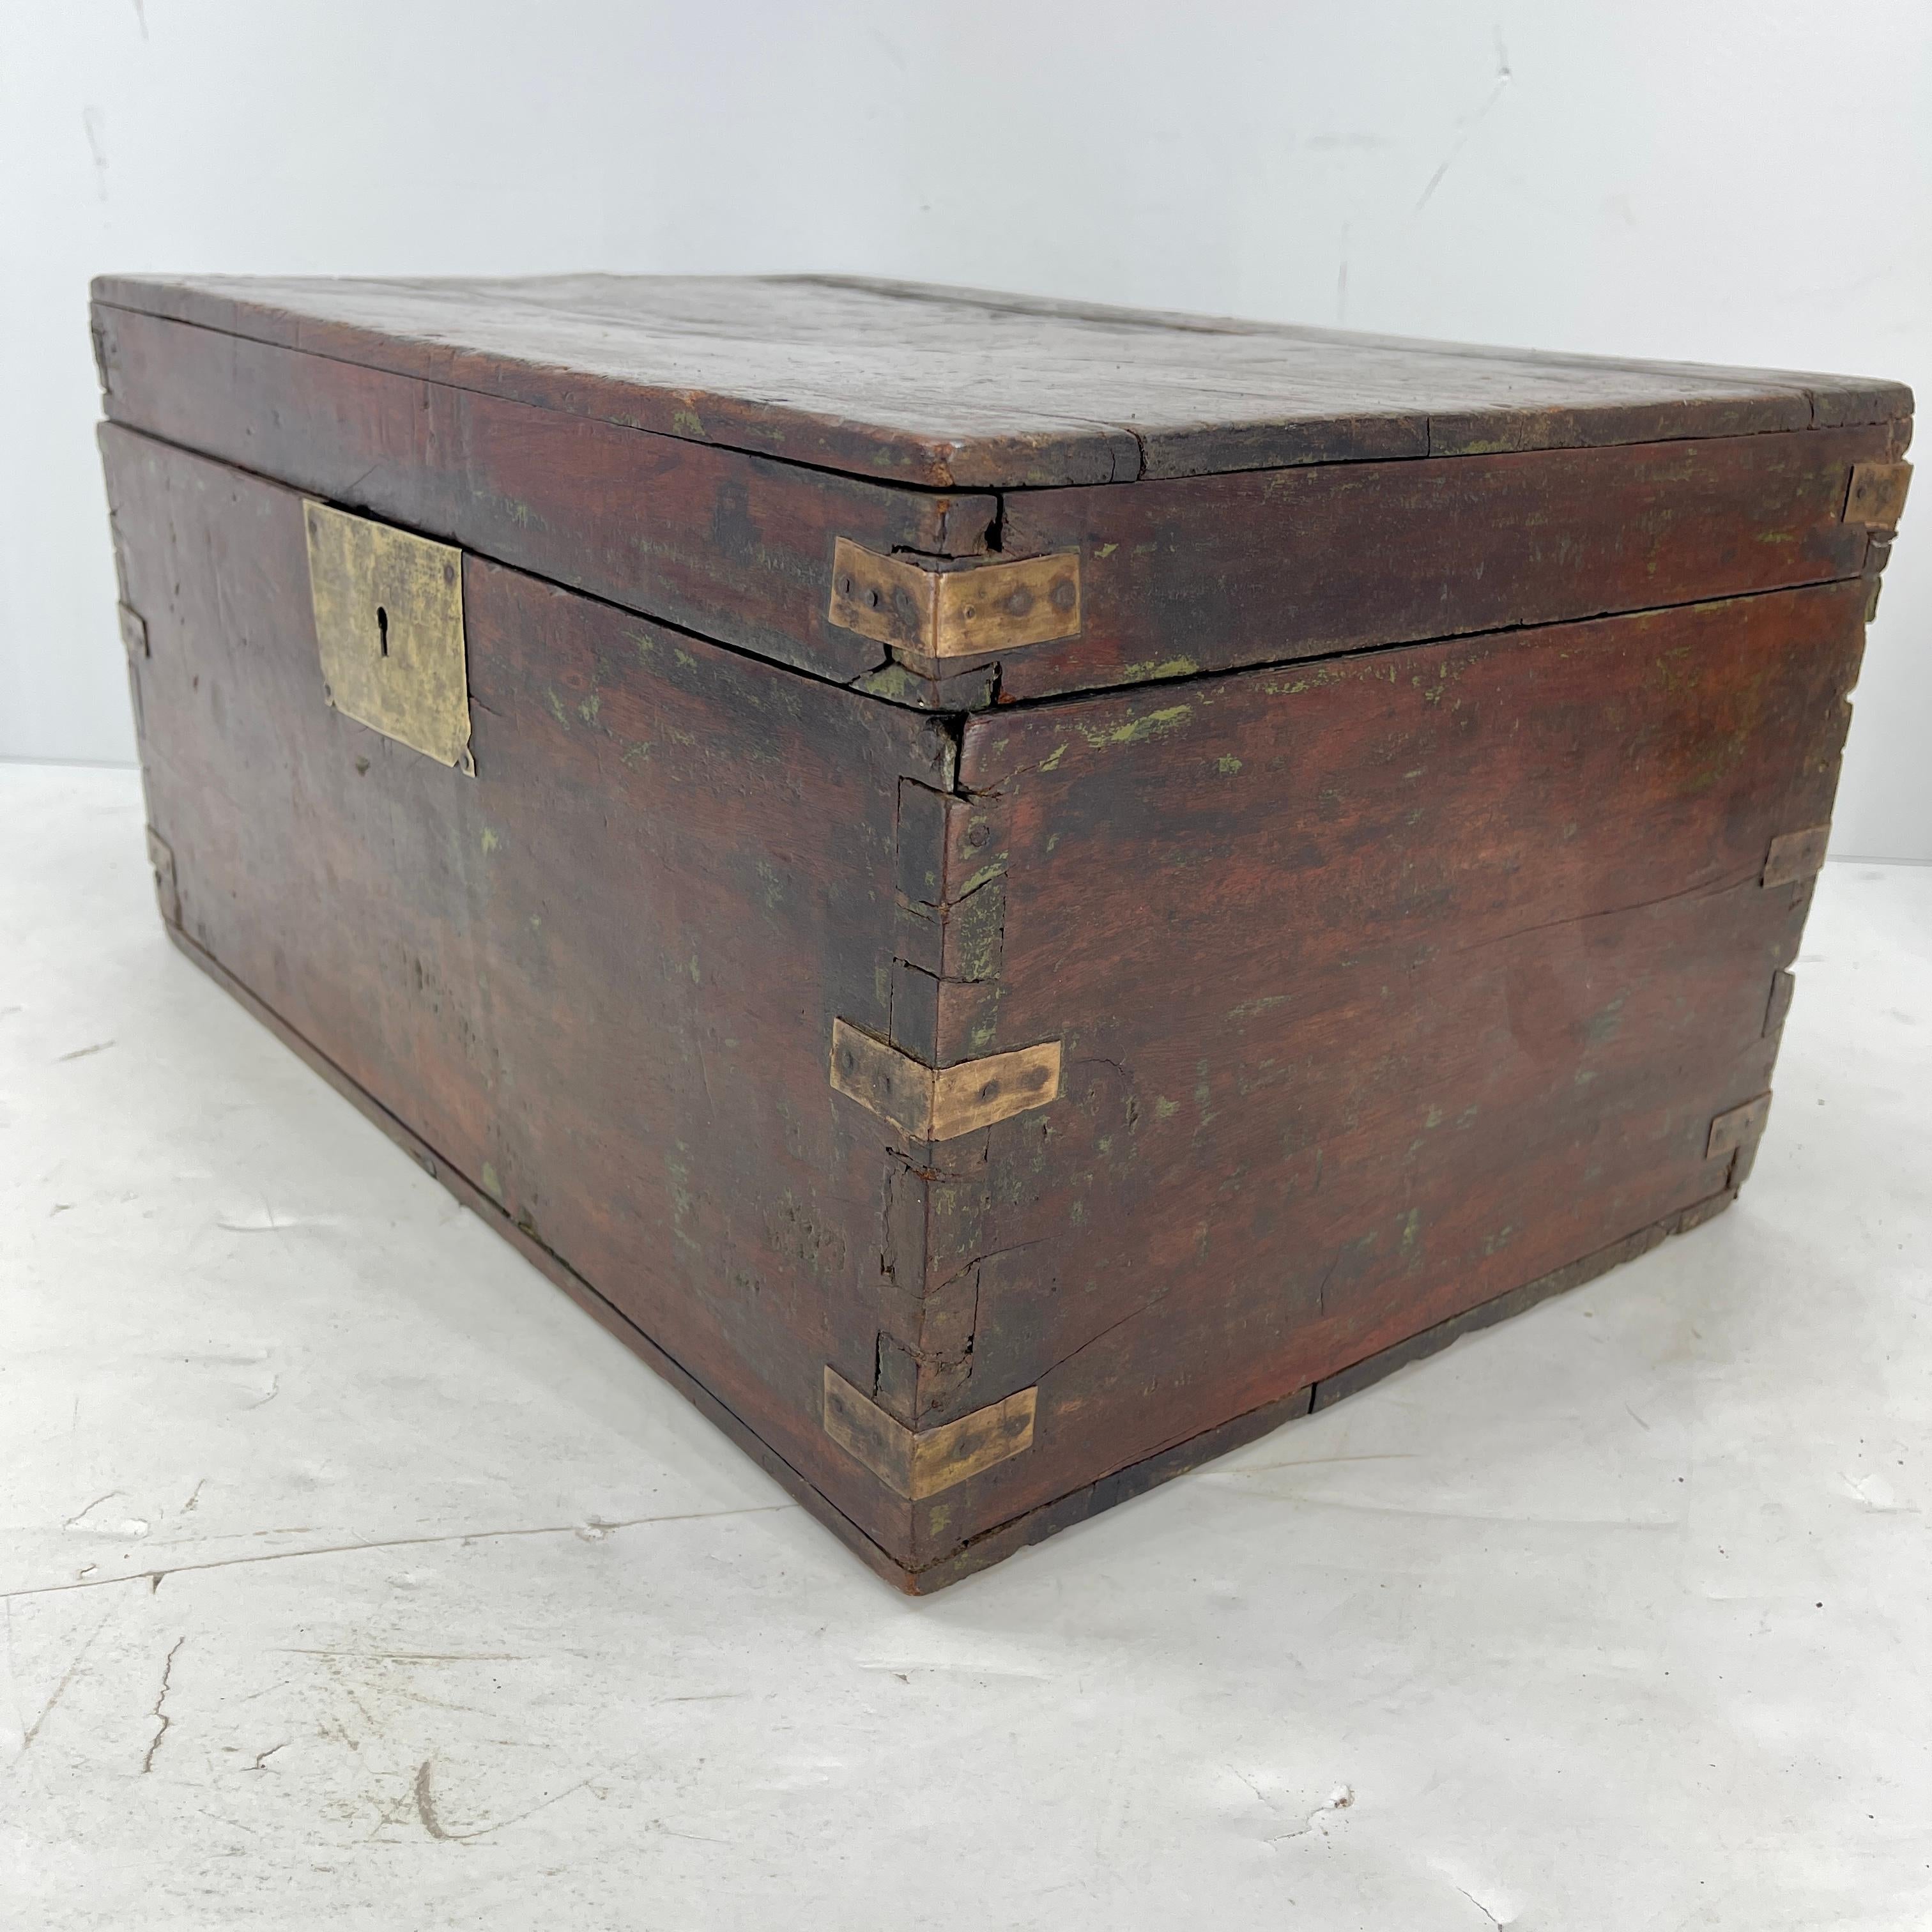 Large Rectangular Antique Wooden Campaign Box with Brass Hardware In Good Condition For Sale In Haddonfield, NJ